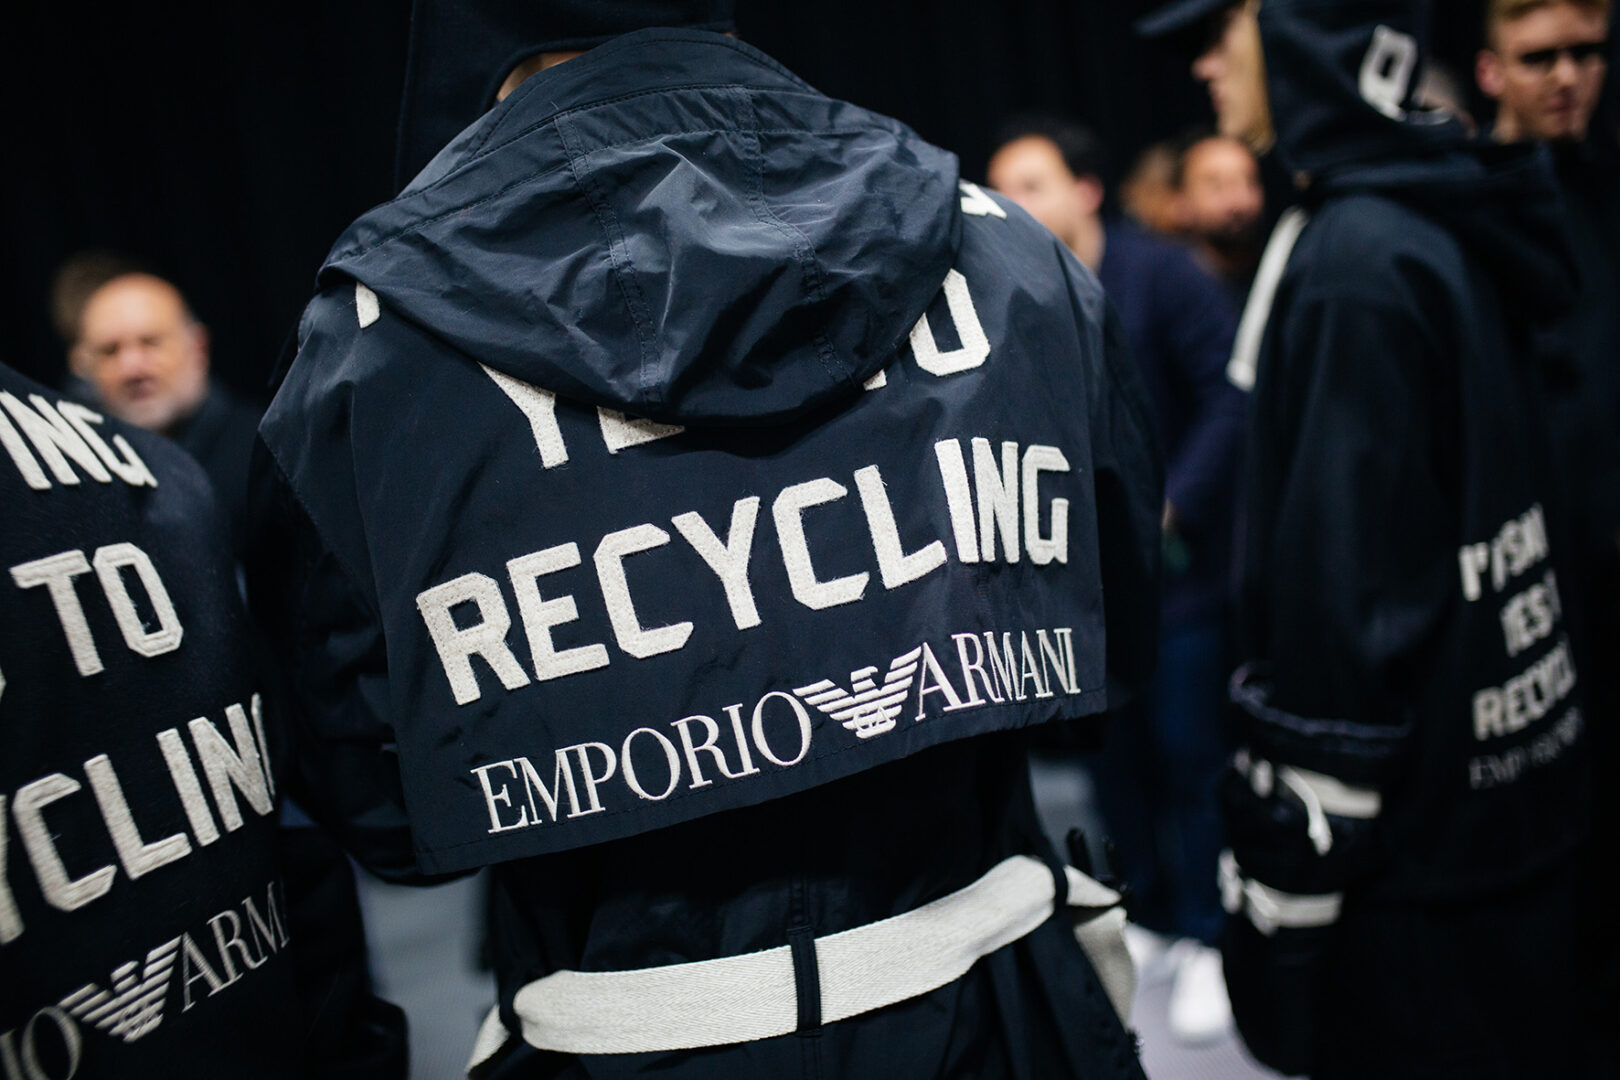 Armani Sustainability Values water-repellent jacket in shiny